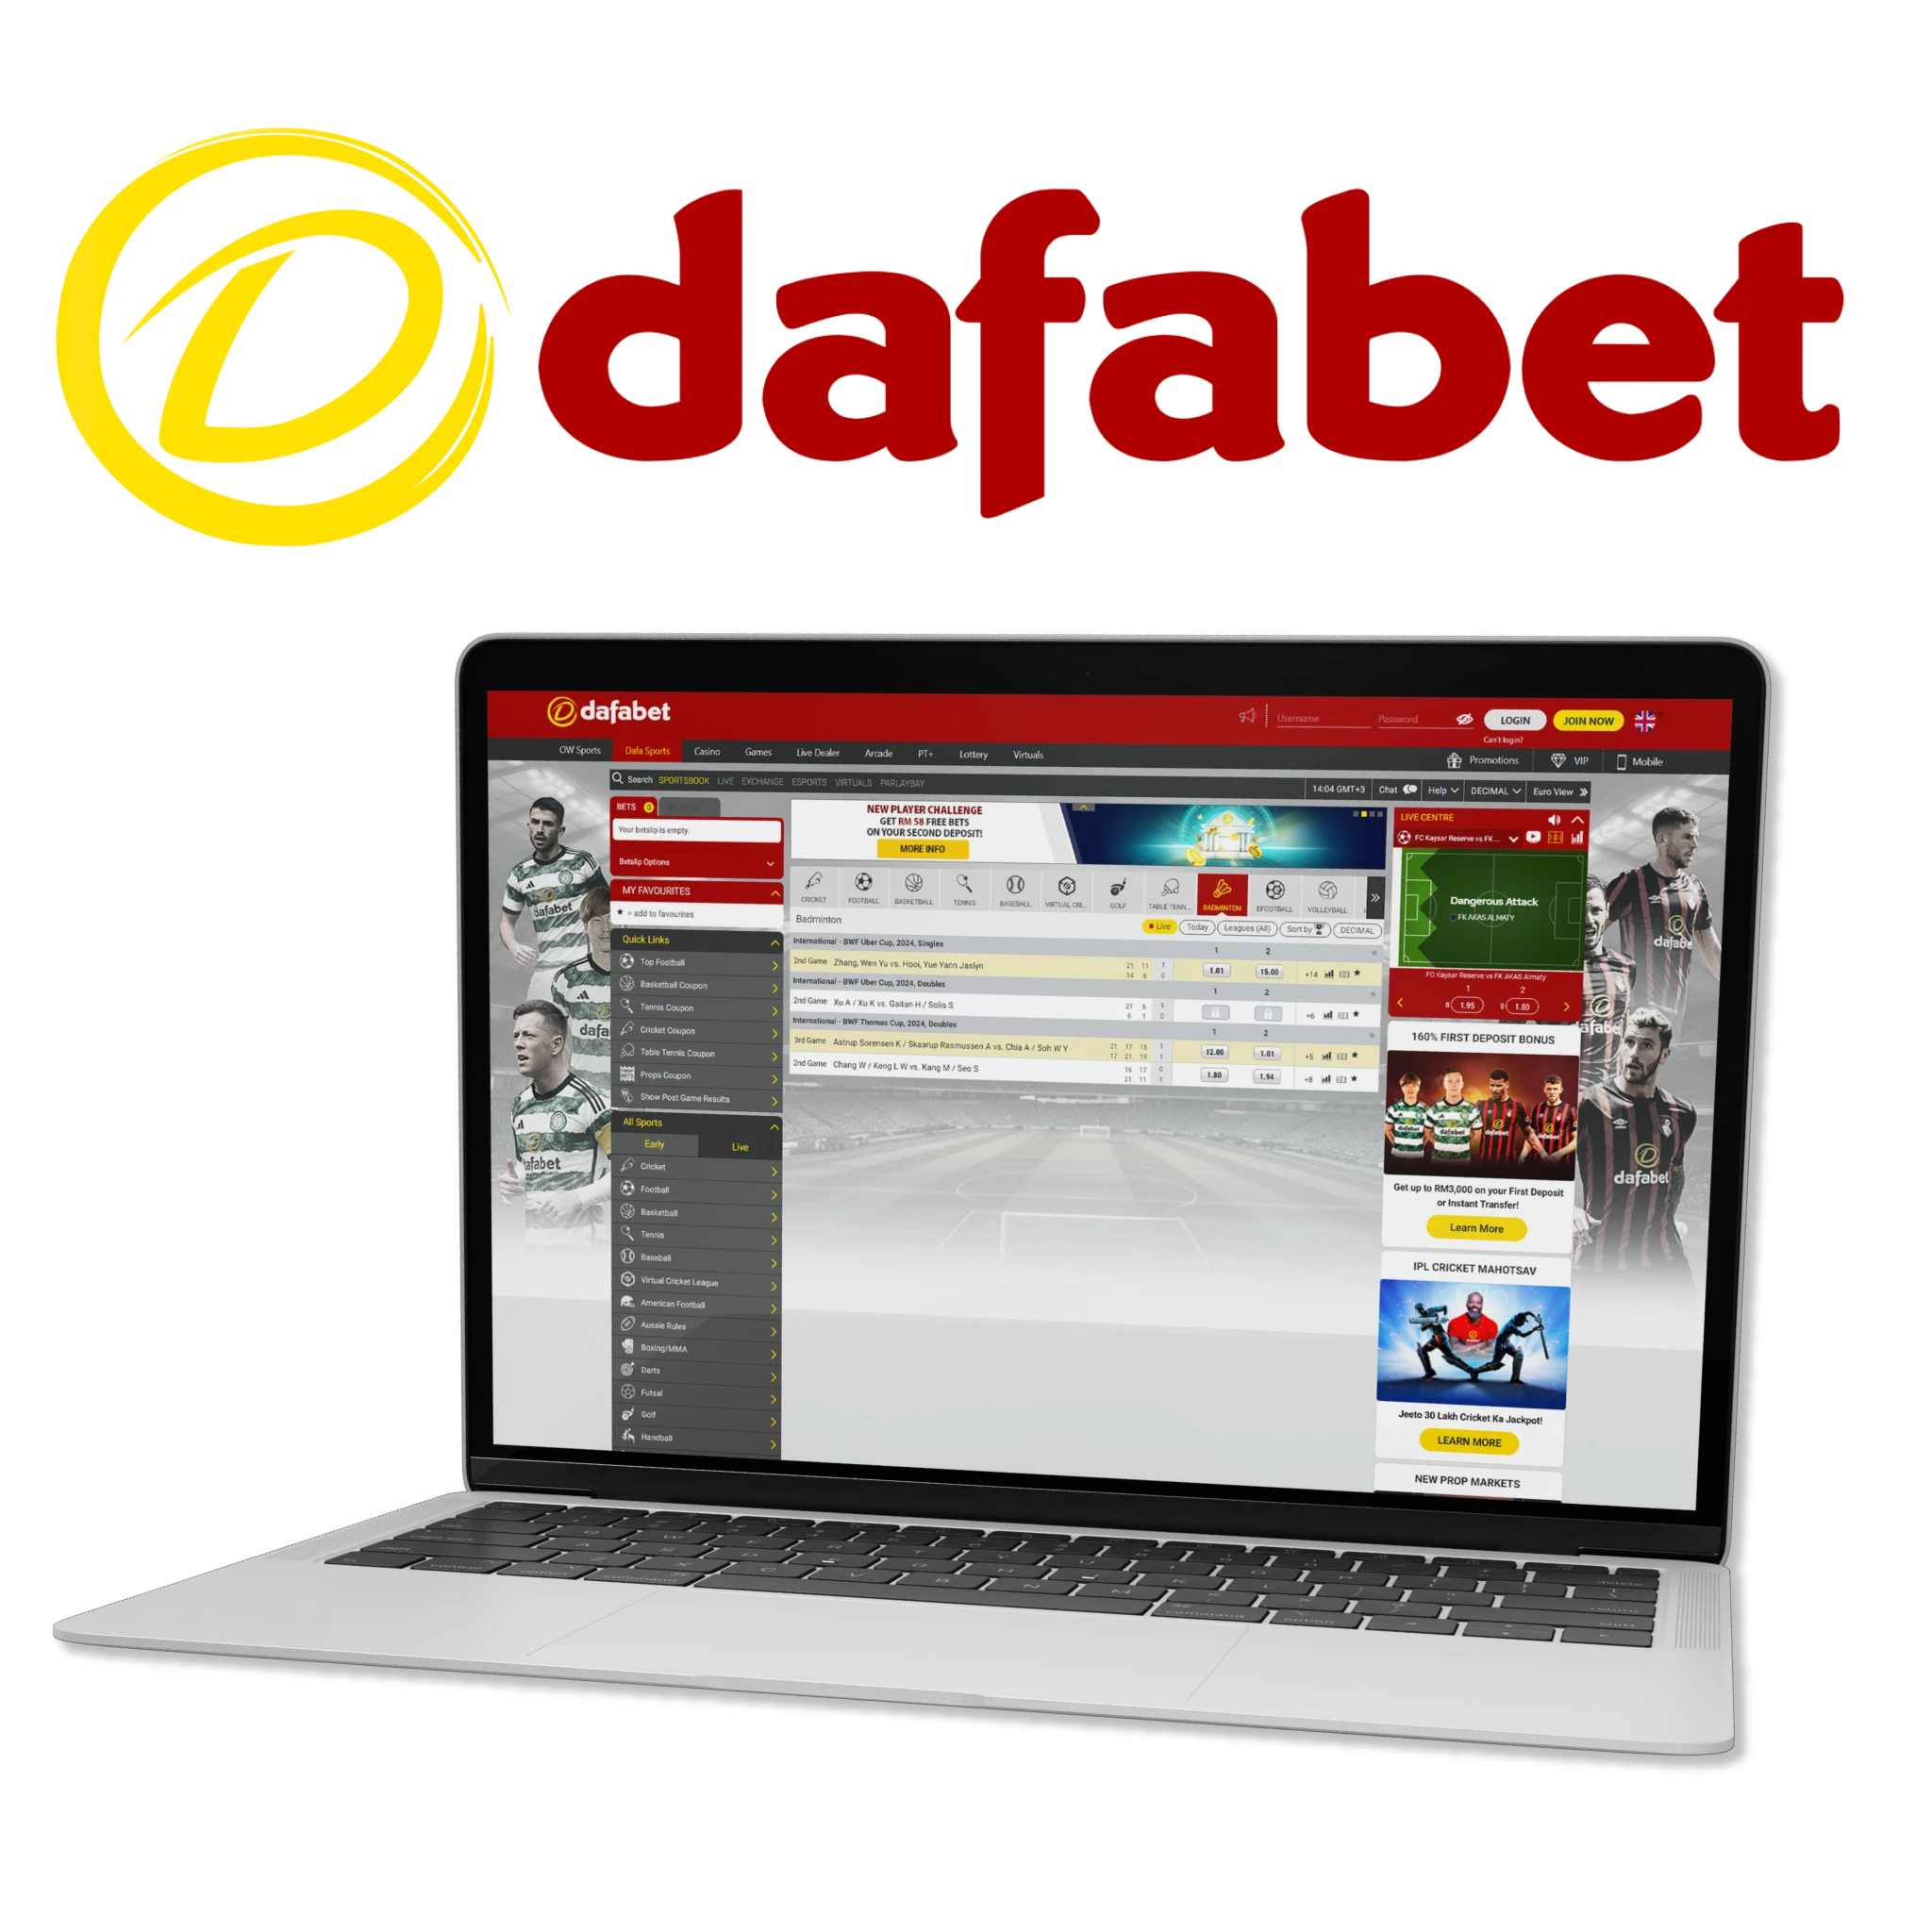 Dafabet - a bookmaker with an impeccable reputation offers you right now to pass instant registration and start betting on badminton live on the official page or mobile app.